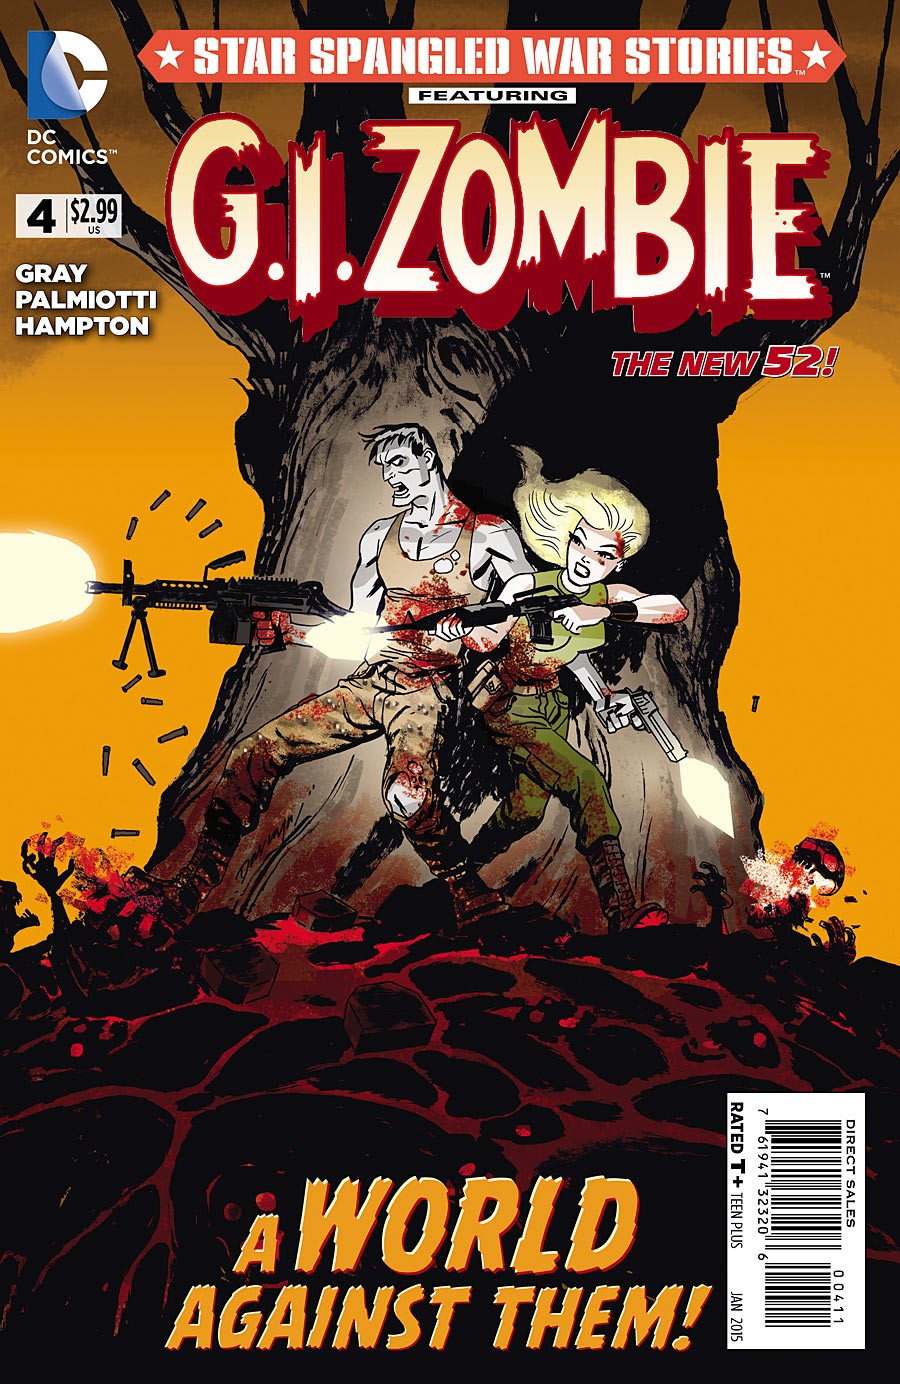 Star-Spangled War Stories Featuring G.I. Zombie Vol. 1 #4